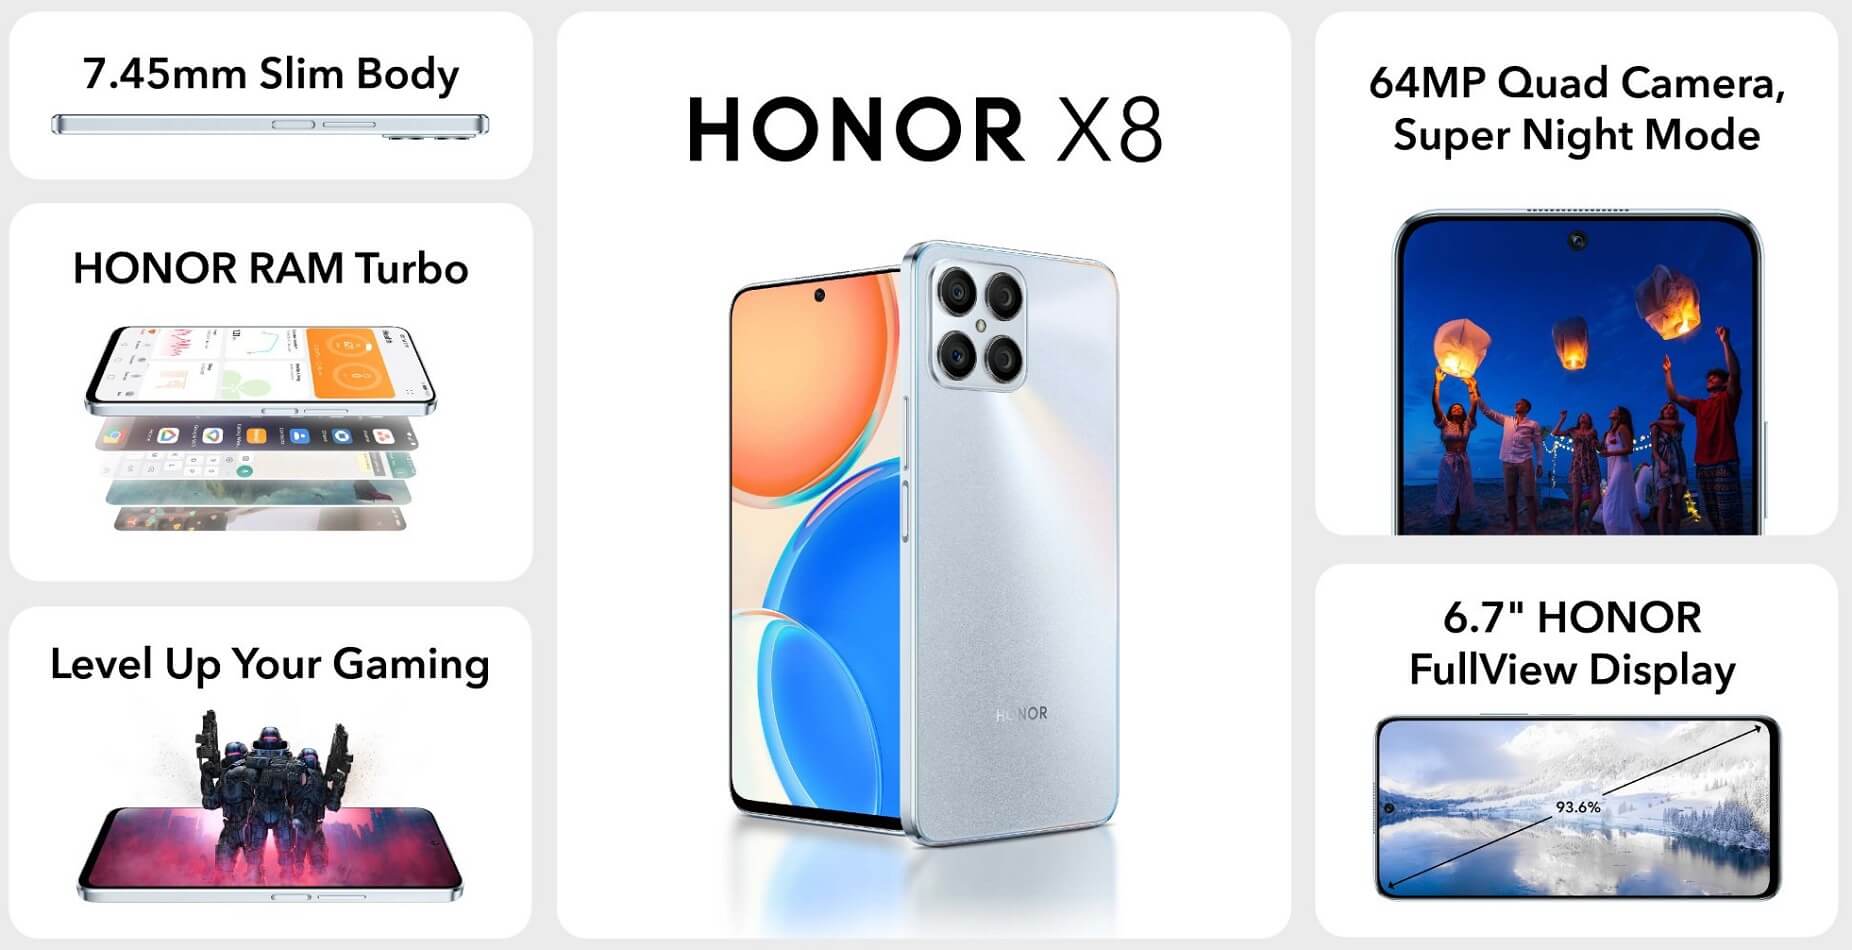 HONOR X8 features